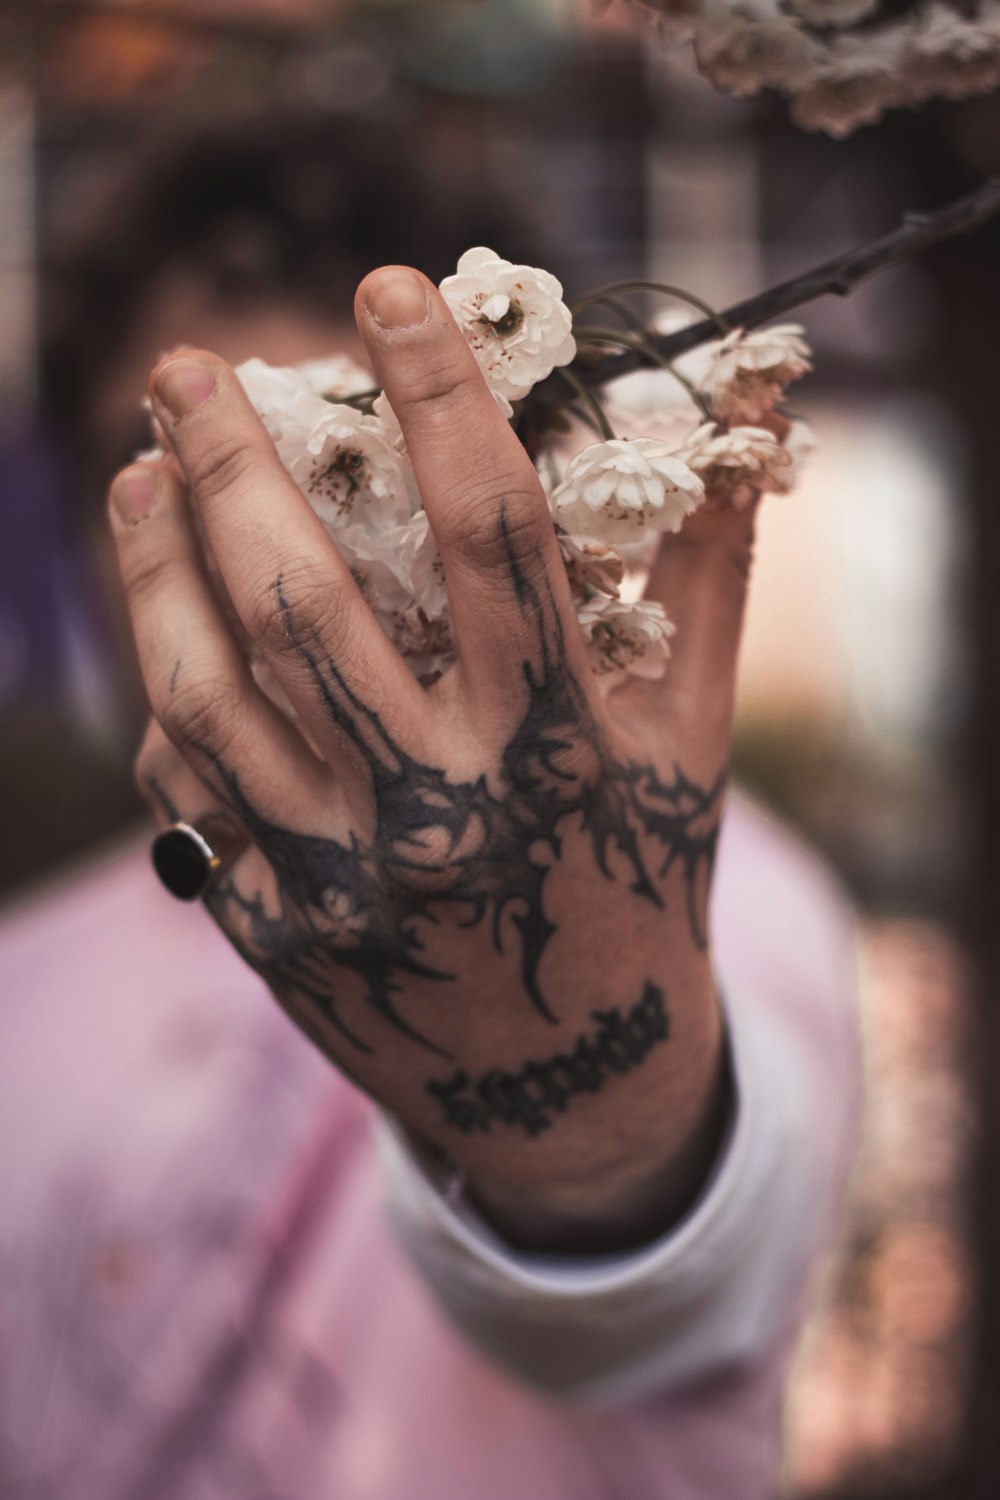 a person with tattoos holding a flower in their hand